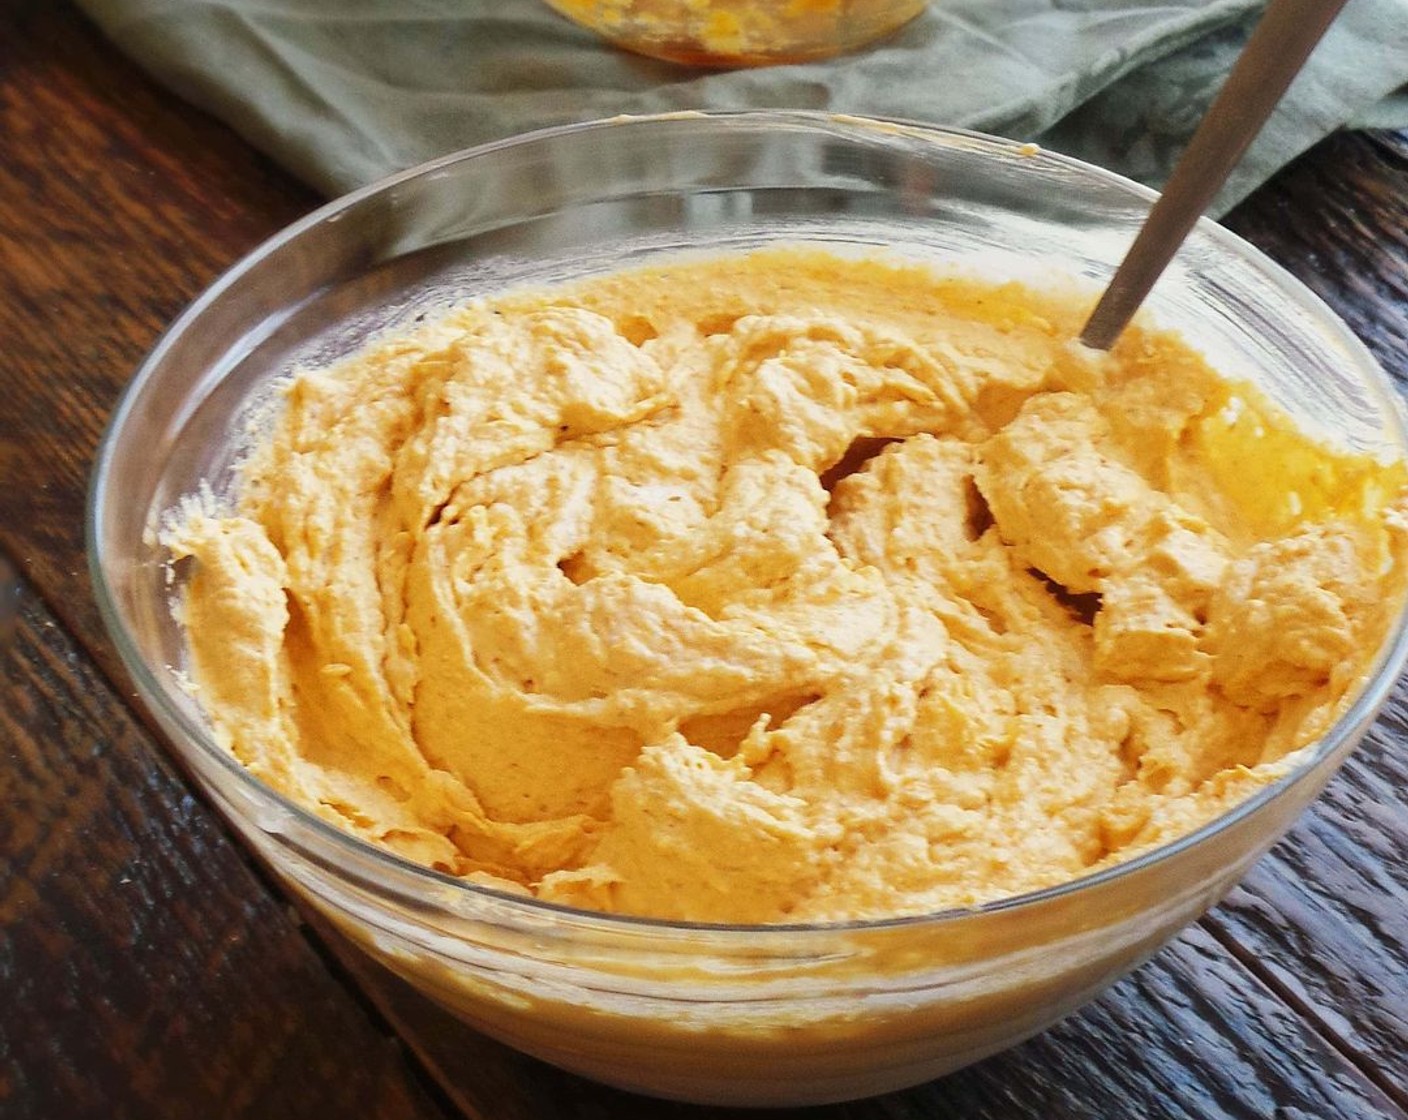 step 3 In a large bowl, mix the Whipped Topping (1 tub), Pumpkin Purée (1 can), Instant Vanilla Pudding (1 box), and Pumpkin Pie Spice (1 tsp) until combined. Transfer into the tub and place in the pumpkin.